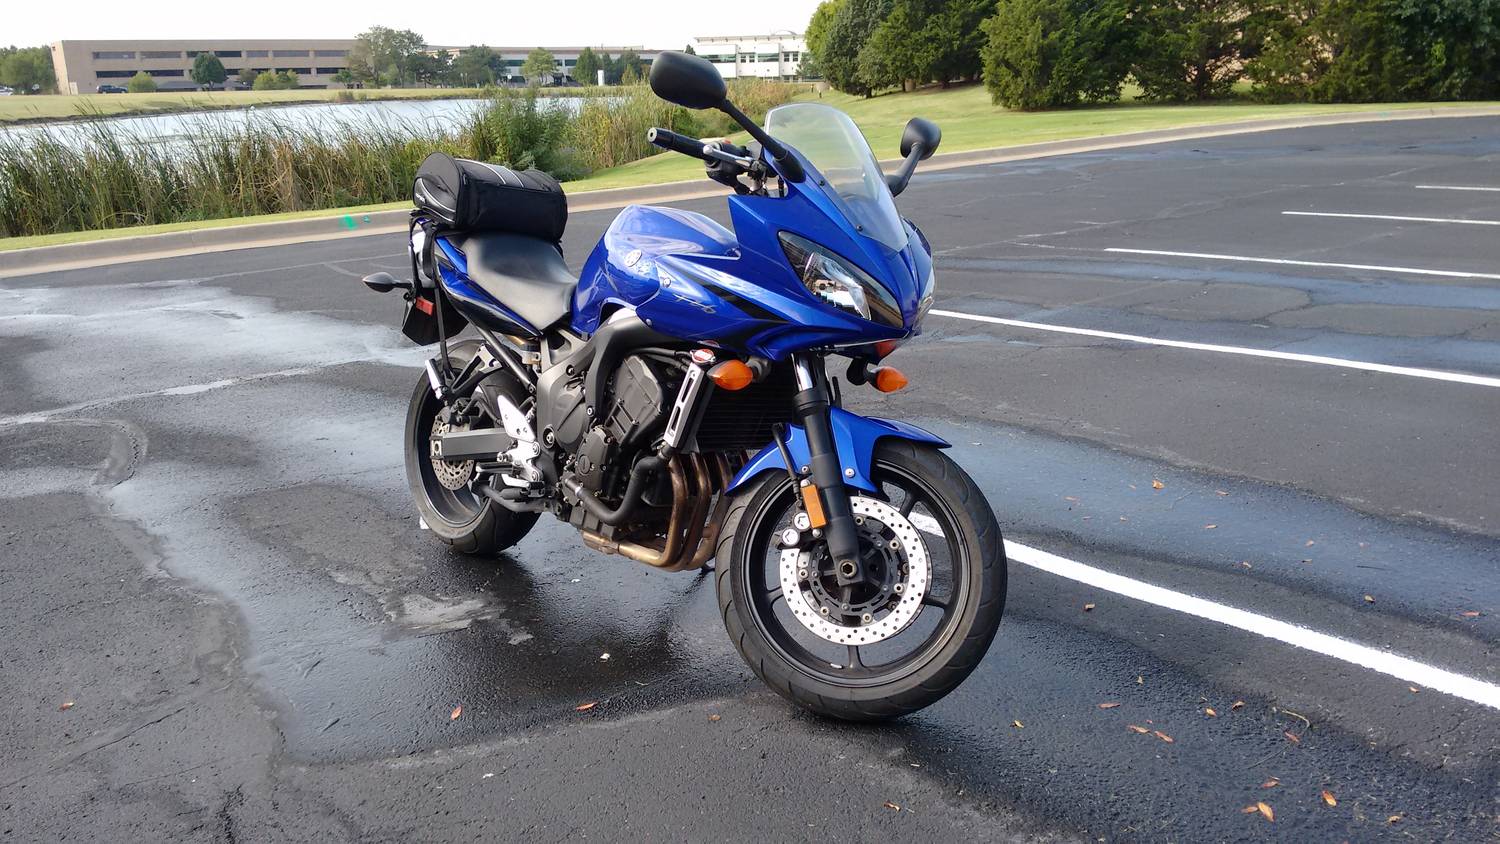 New-To-Me FZ